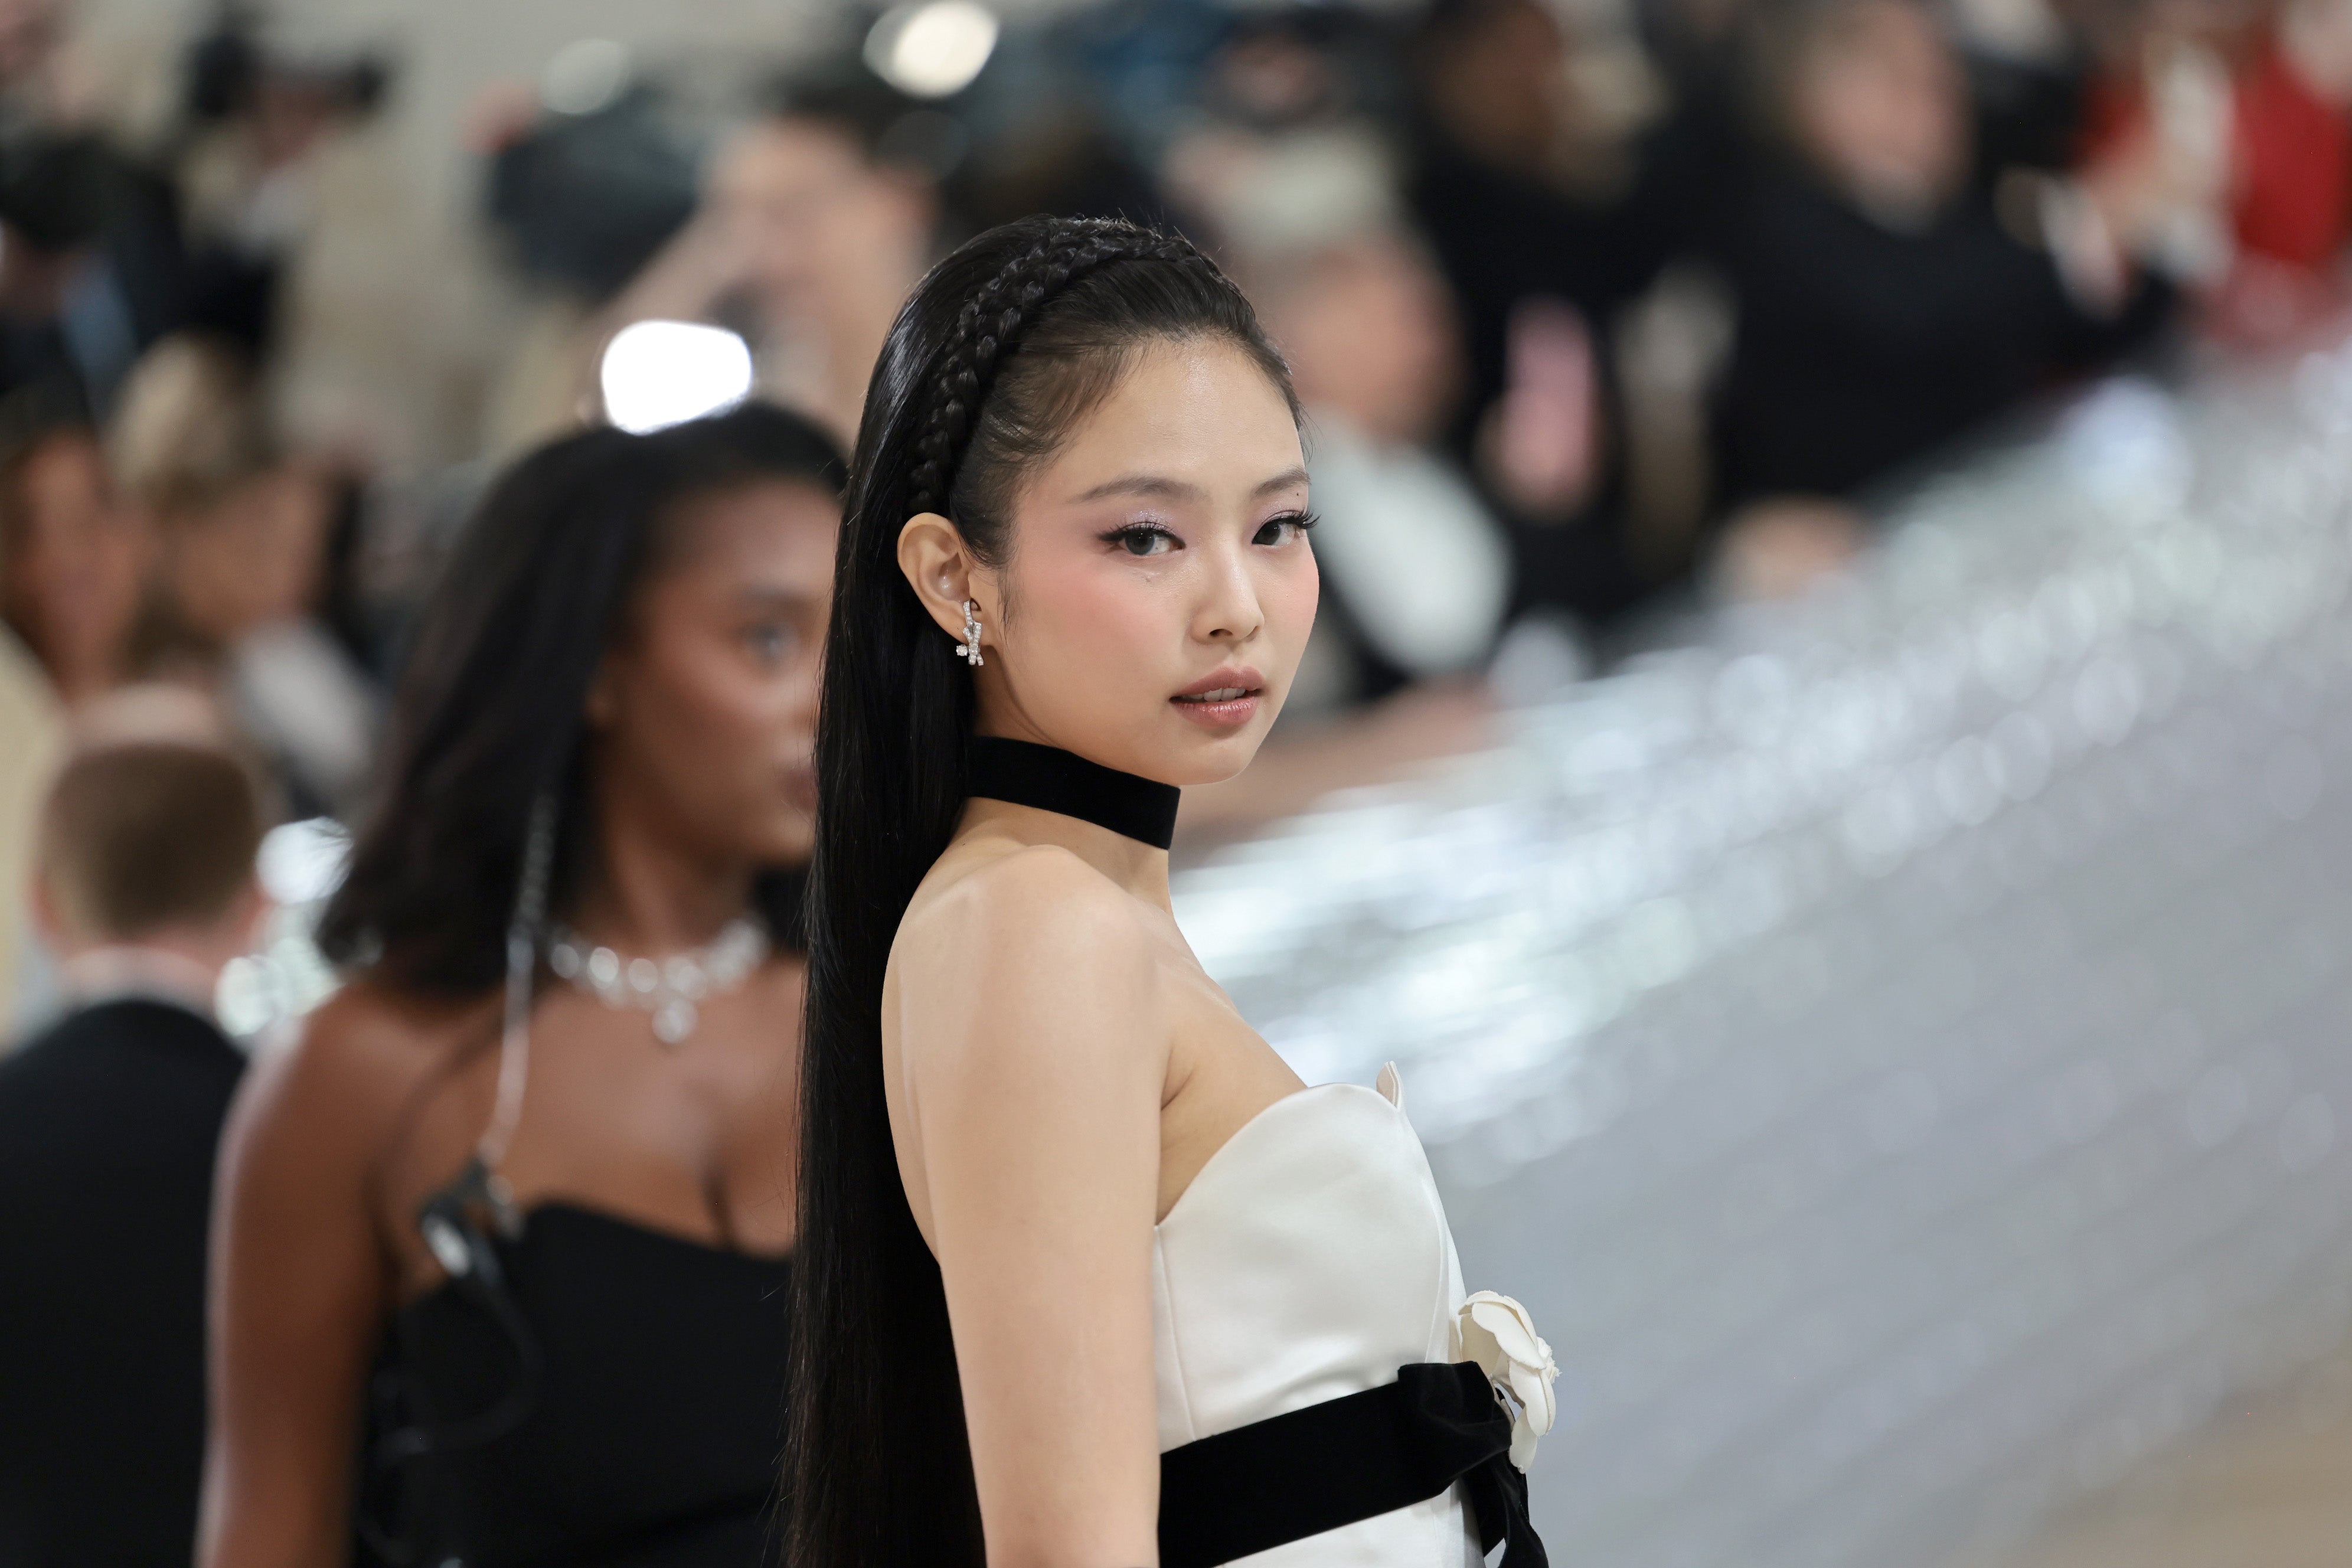 Blackpink’s Jennie opens up about how ‘lucky’ she was to wear Chanel ...